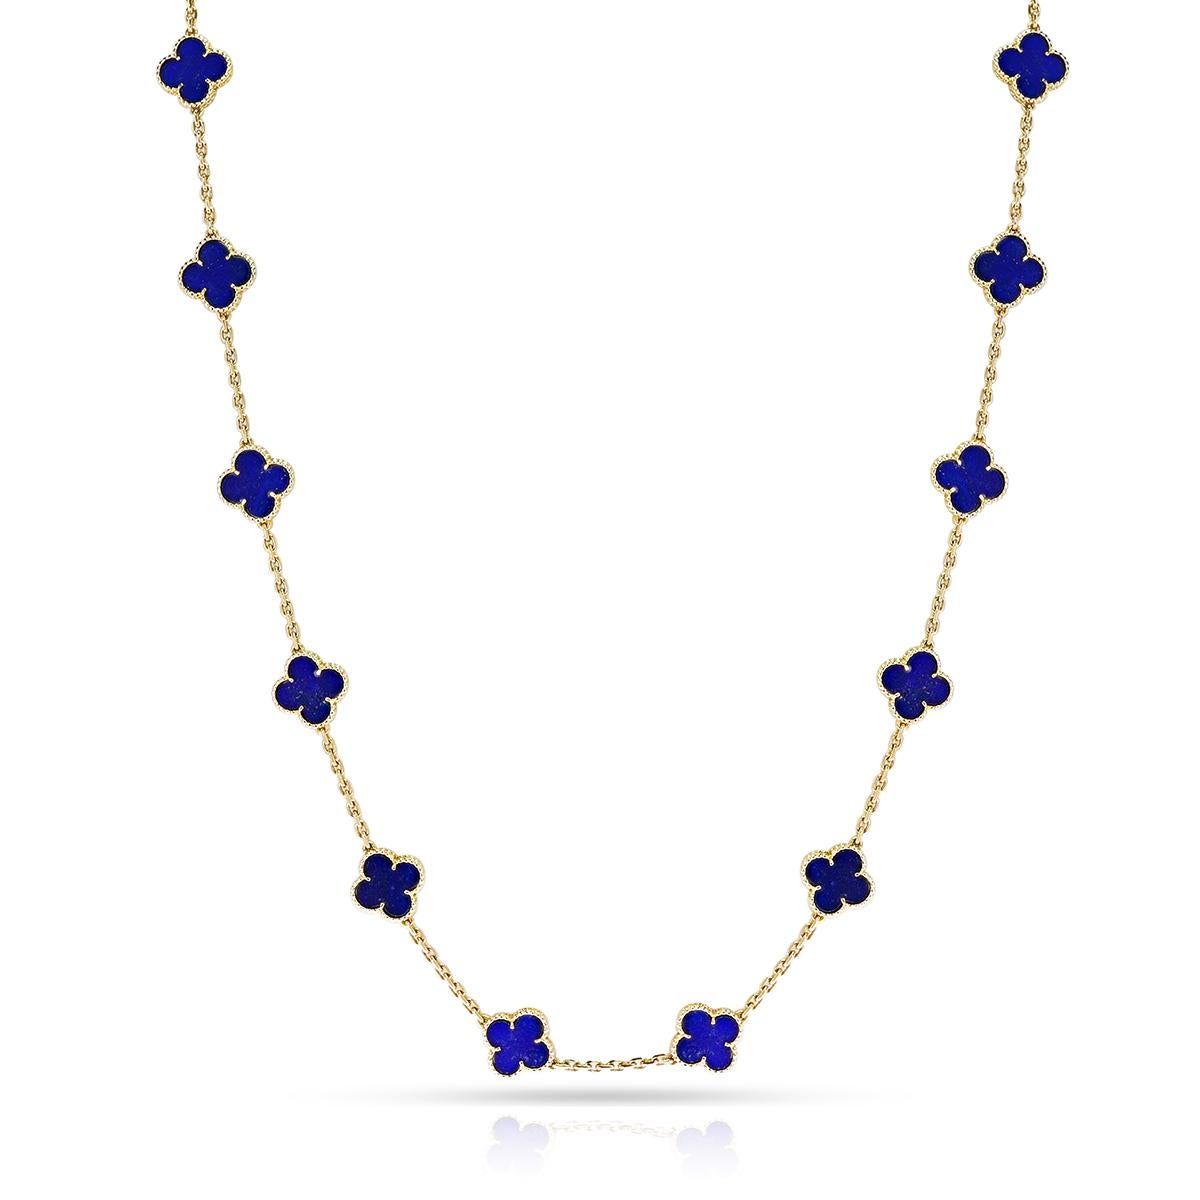 Van Cleef & Arpels 20 Motif Lapis Alhambra Necklace. Signed and includes service paperwork.